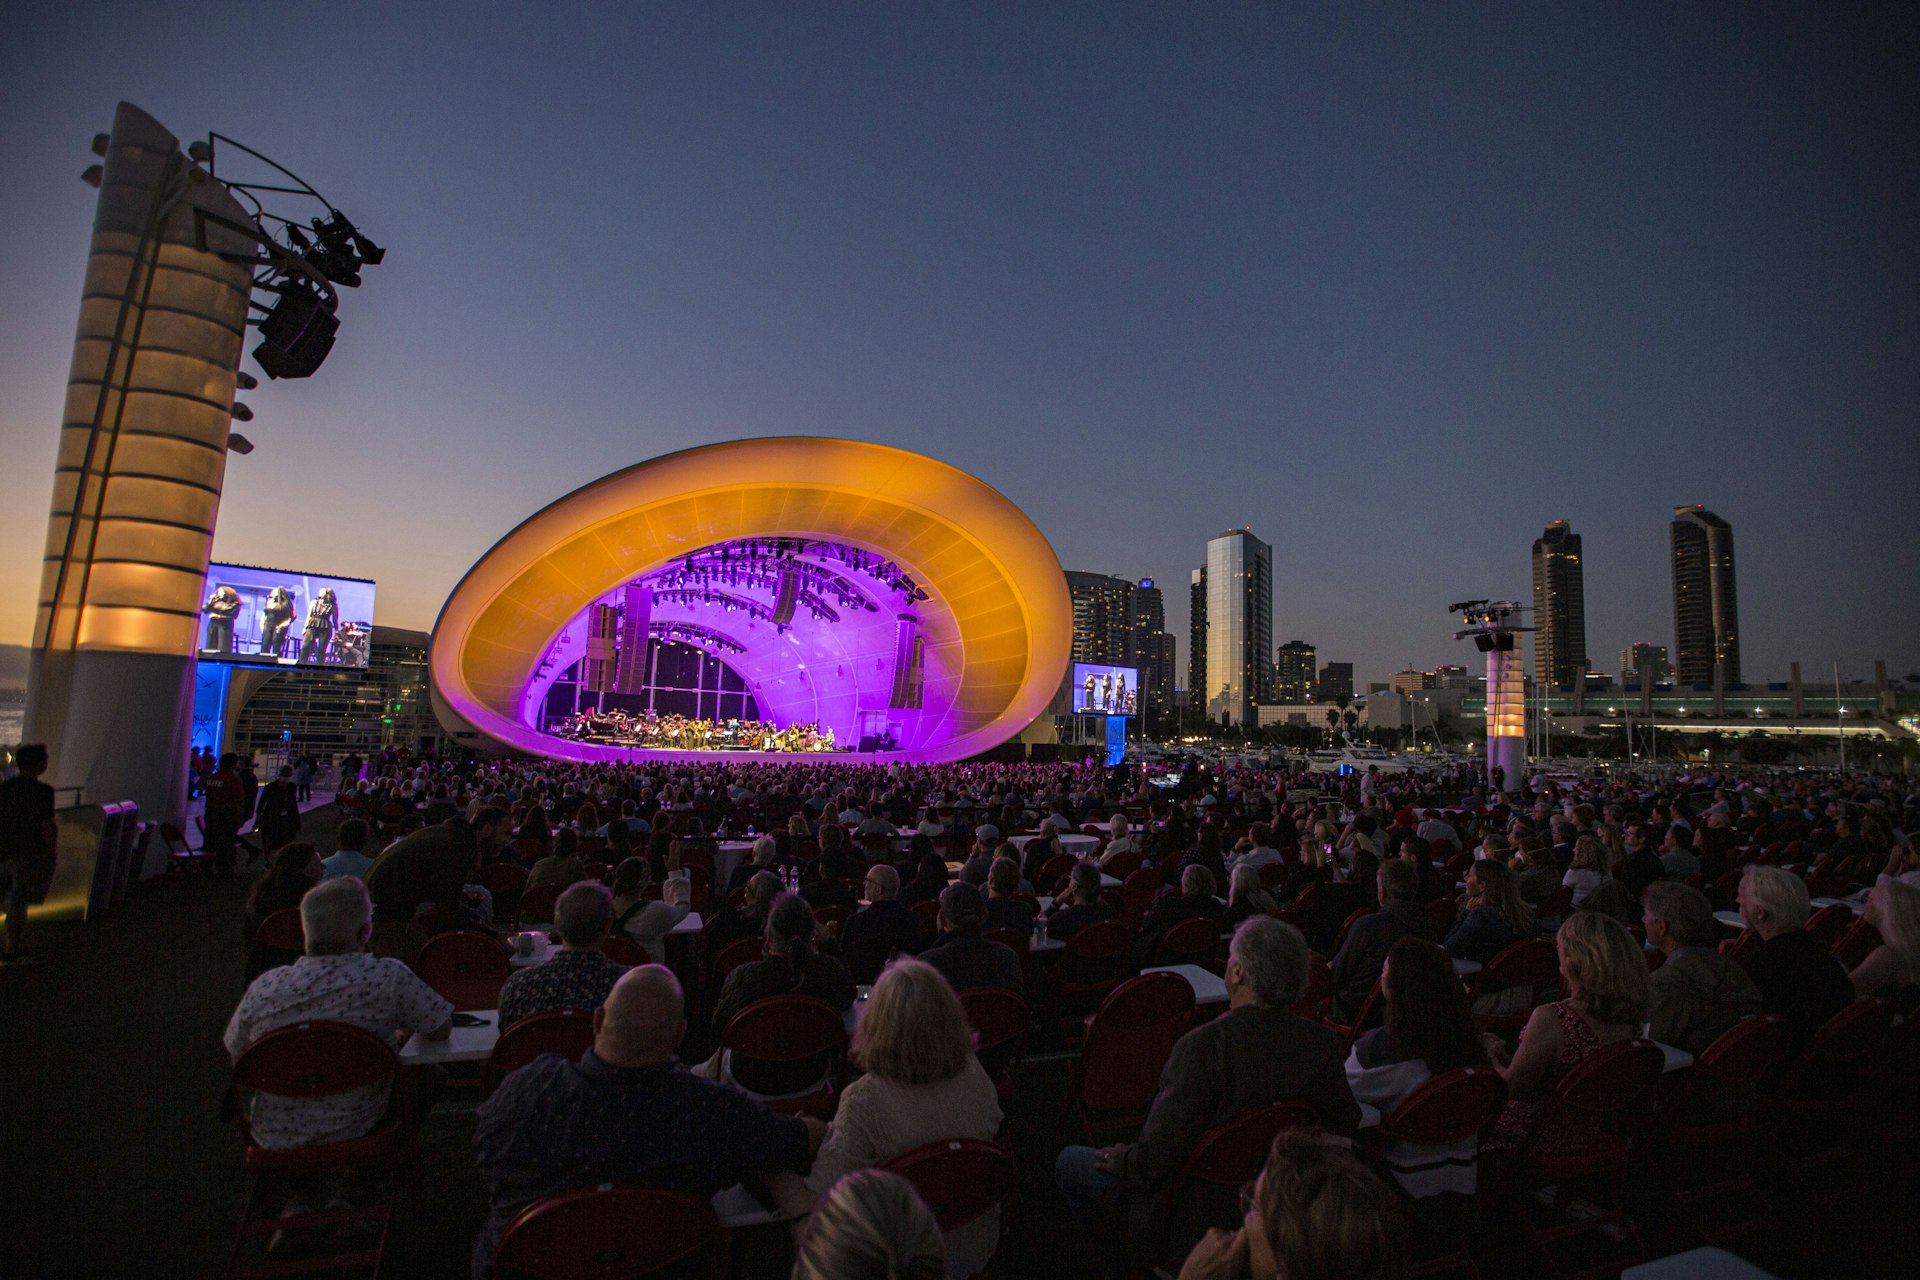 The Rady Shell outdoor music venue lit up at night in San Diego